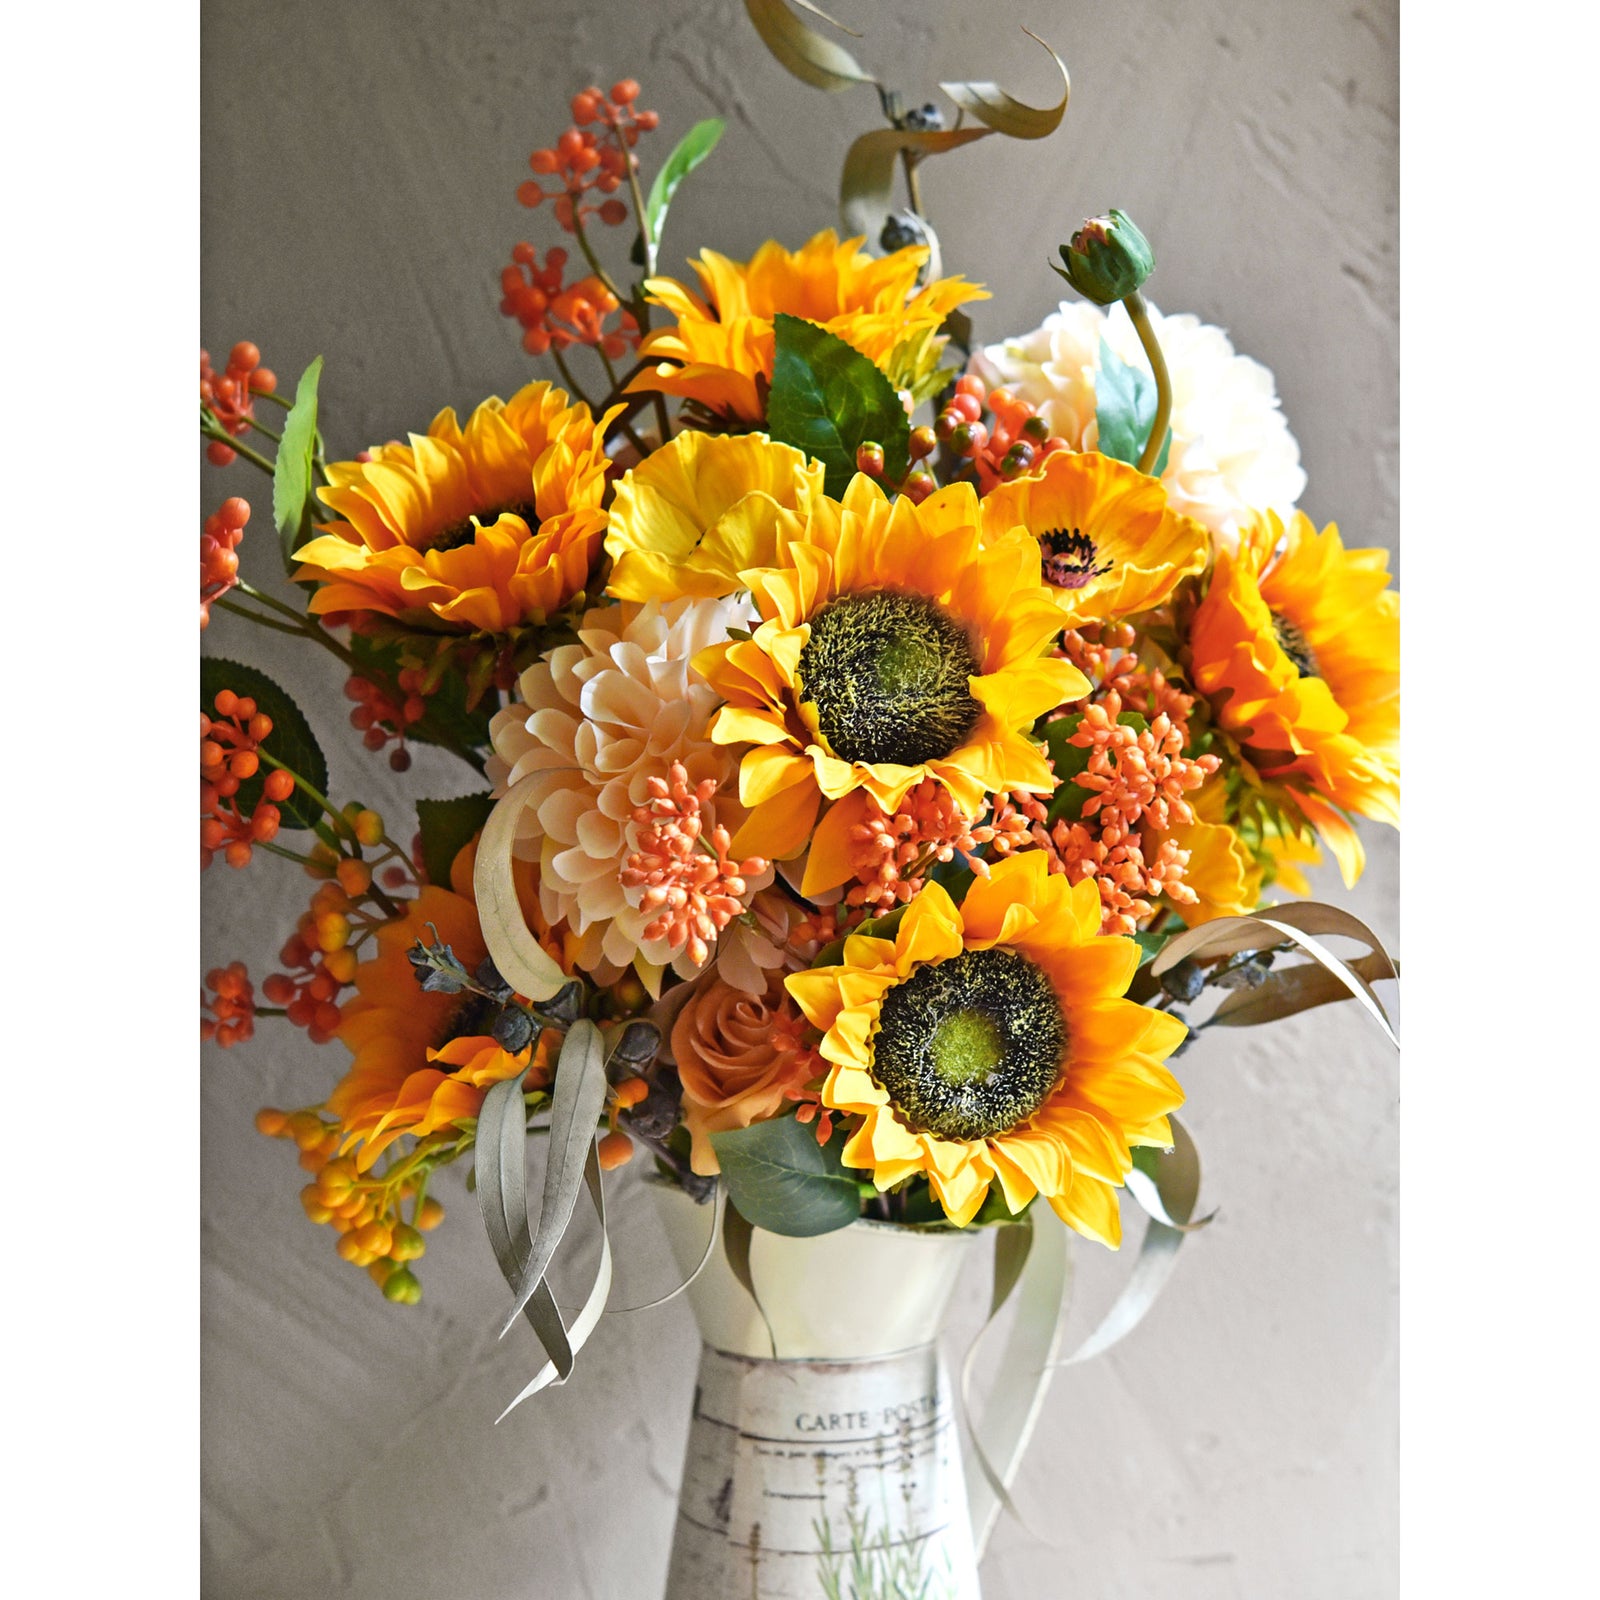 23.6 Real Touch Faux Sunflowers, Artificial Sunflowers, Fake Sunflowers  Centerpieces, DIY Floral, Wedding/home Decorations 